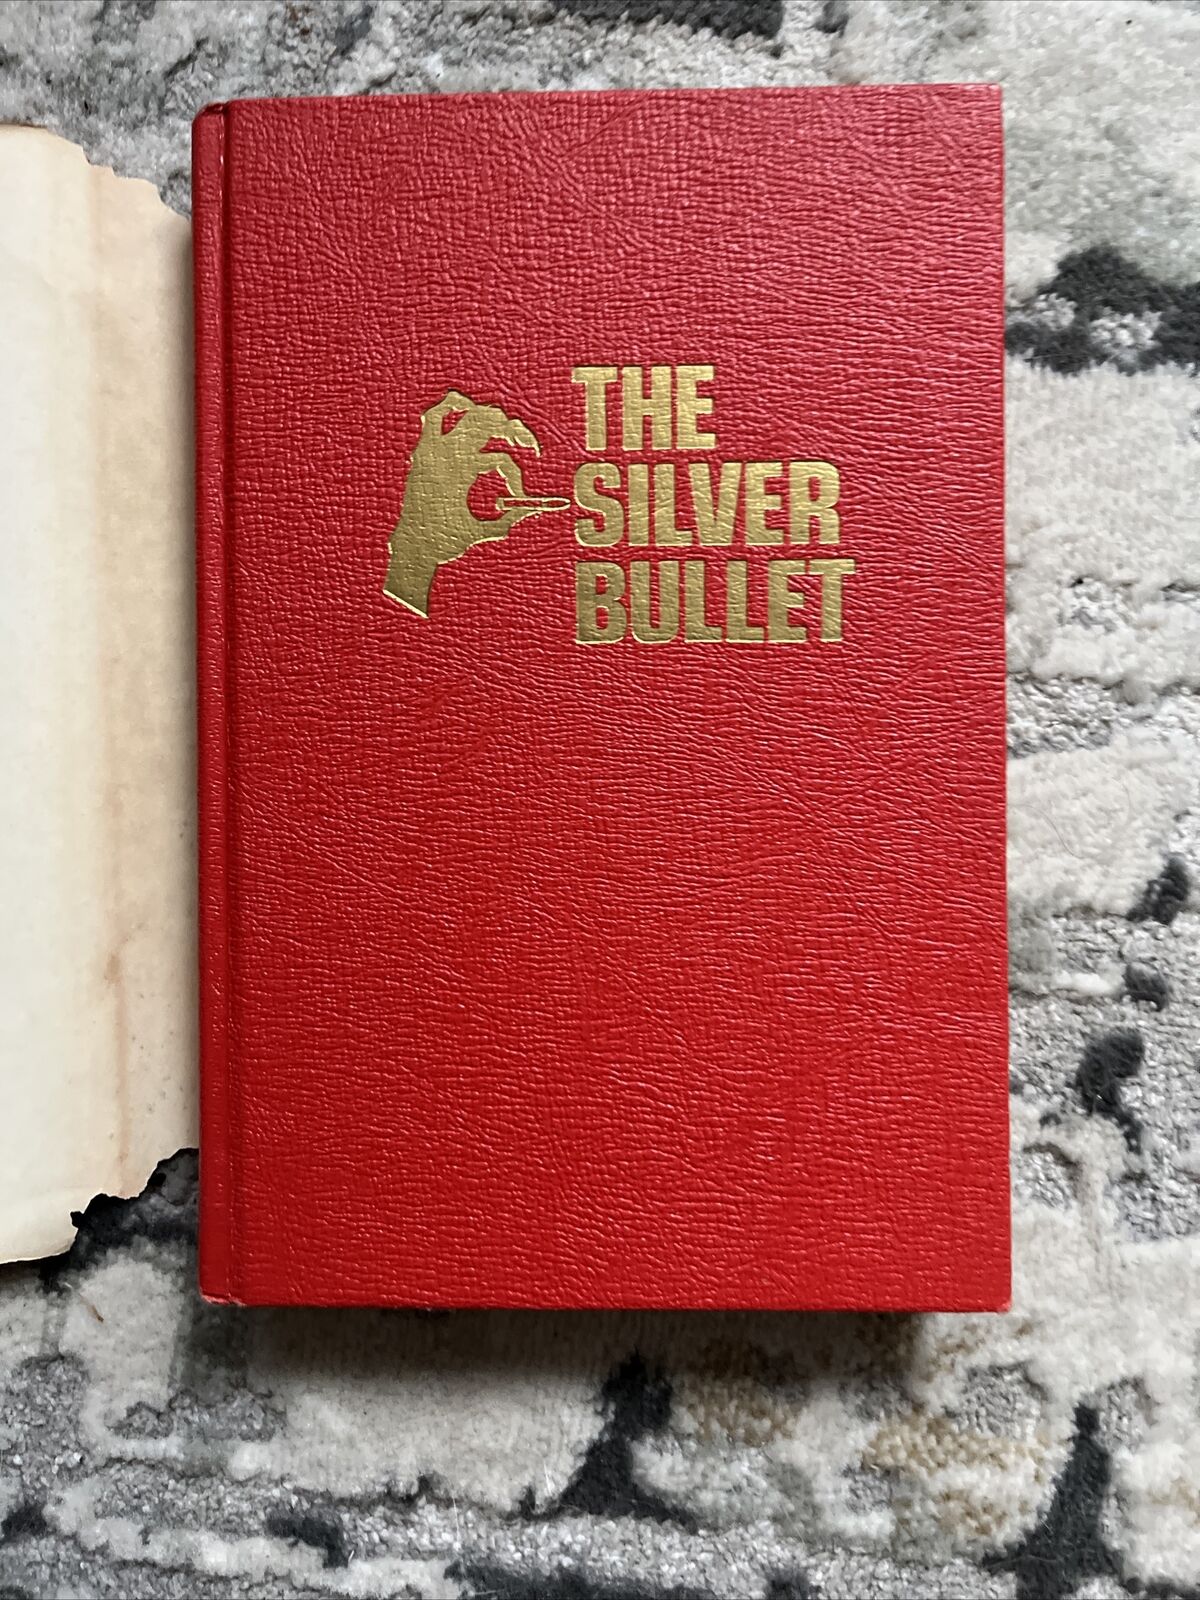 The silver bullet & Other American Witch Stories By H. J. Davis 1975, hardcover.